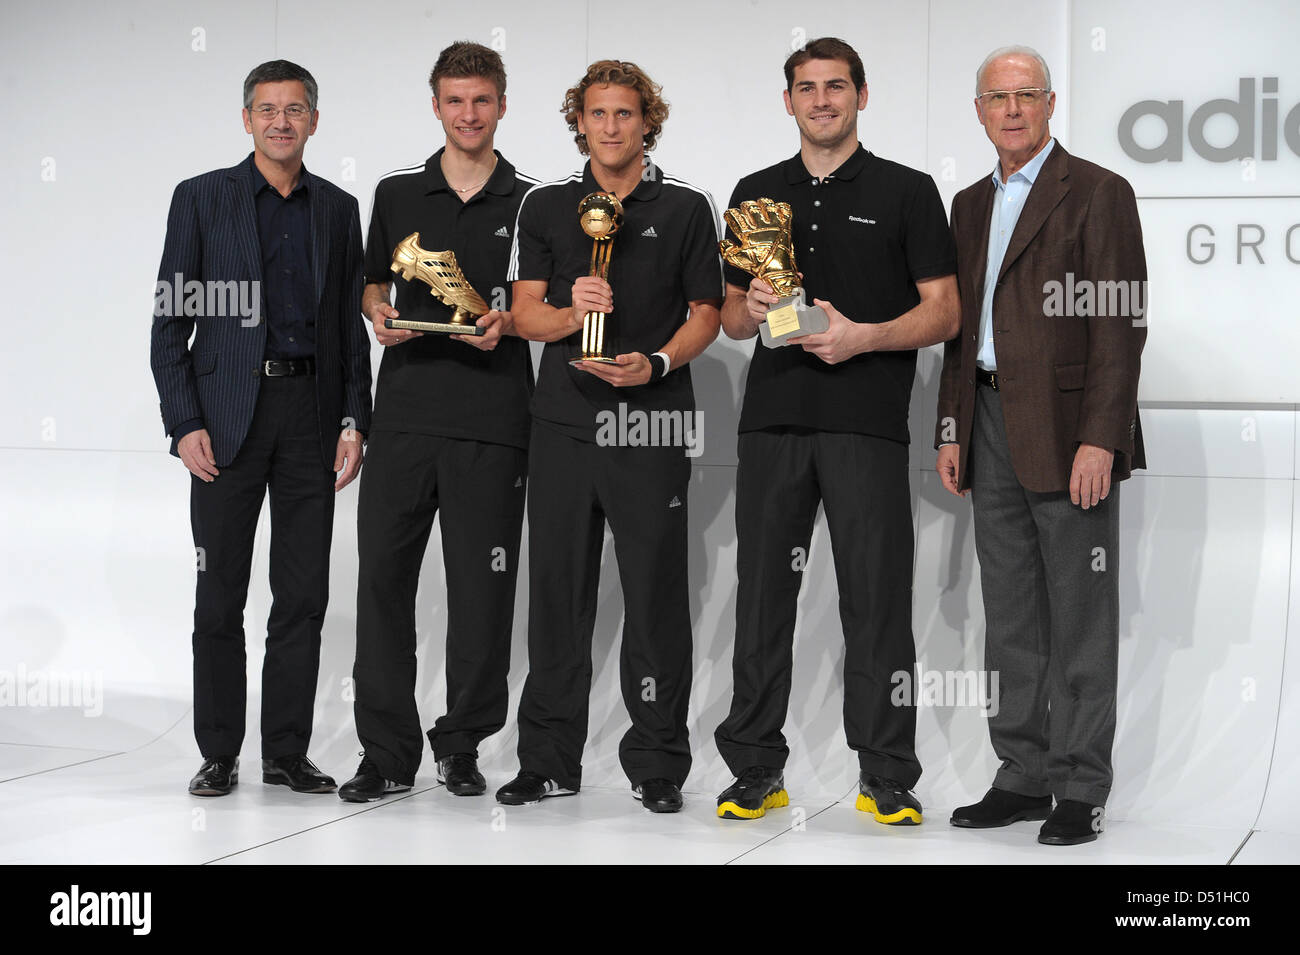 Herbert Hainer (L-R) executive chairman of the sportswear company adidas AG, German national soccer player Thomas Mueller, Uruguayan national soccer player Diego Forlan, Spanish national goalkeeper Iker Casillas and FIFA-representative Franz Beckenbauer stand next to each other during the award ceremony of the best players of the FIFA World Cup 2010 at the company headquarters of a Stock Photo